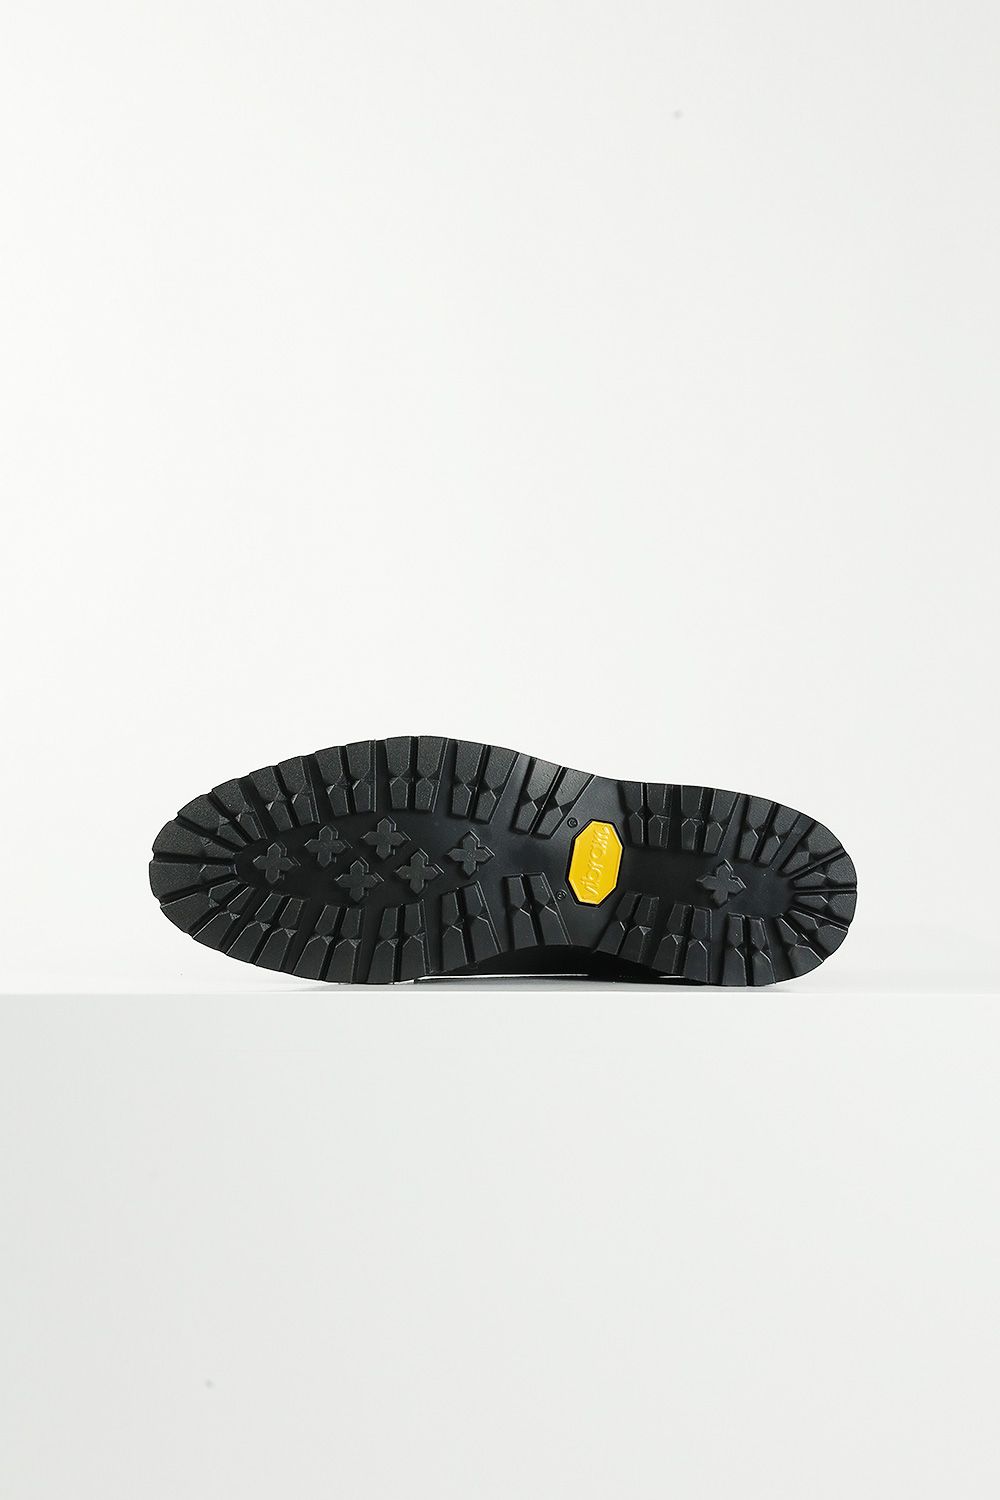 WEWILL - WEWILL SHOES NO.1 YUI(BLACK) | Acacia ONLINESTORE